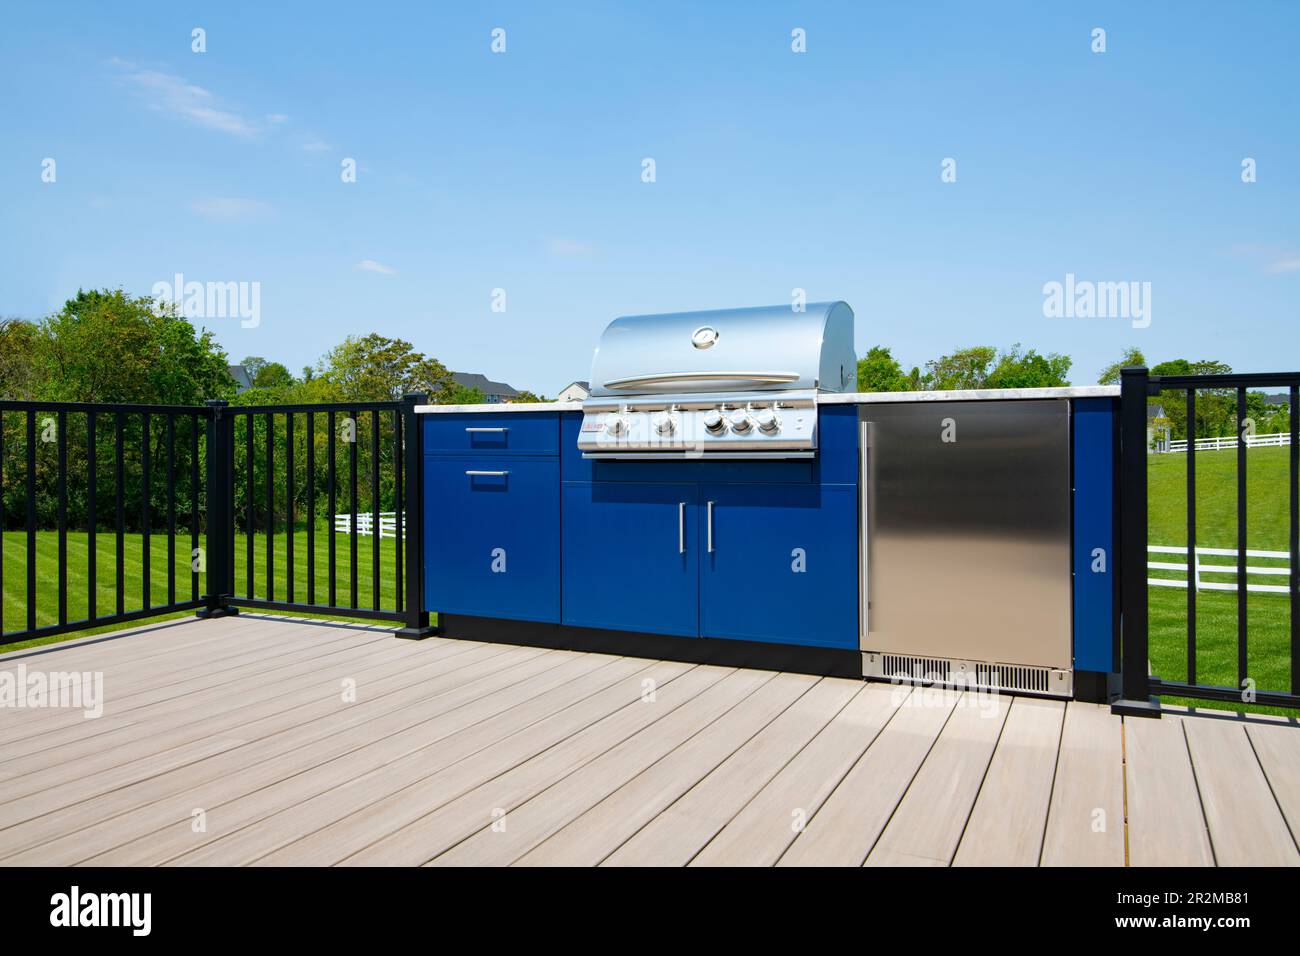 An outdoor gas grill kitchen with a refrigerator on a backyard deck in Maryland USA Stock Photo